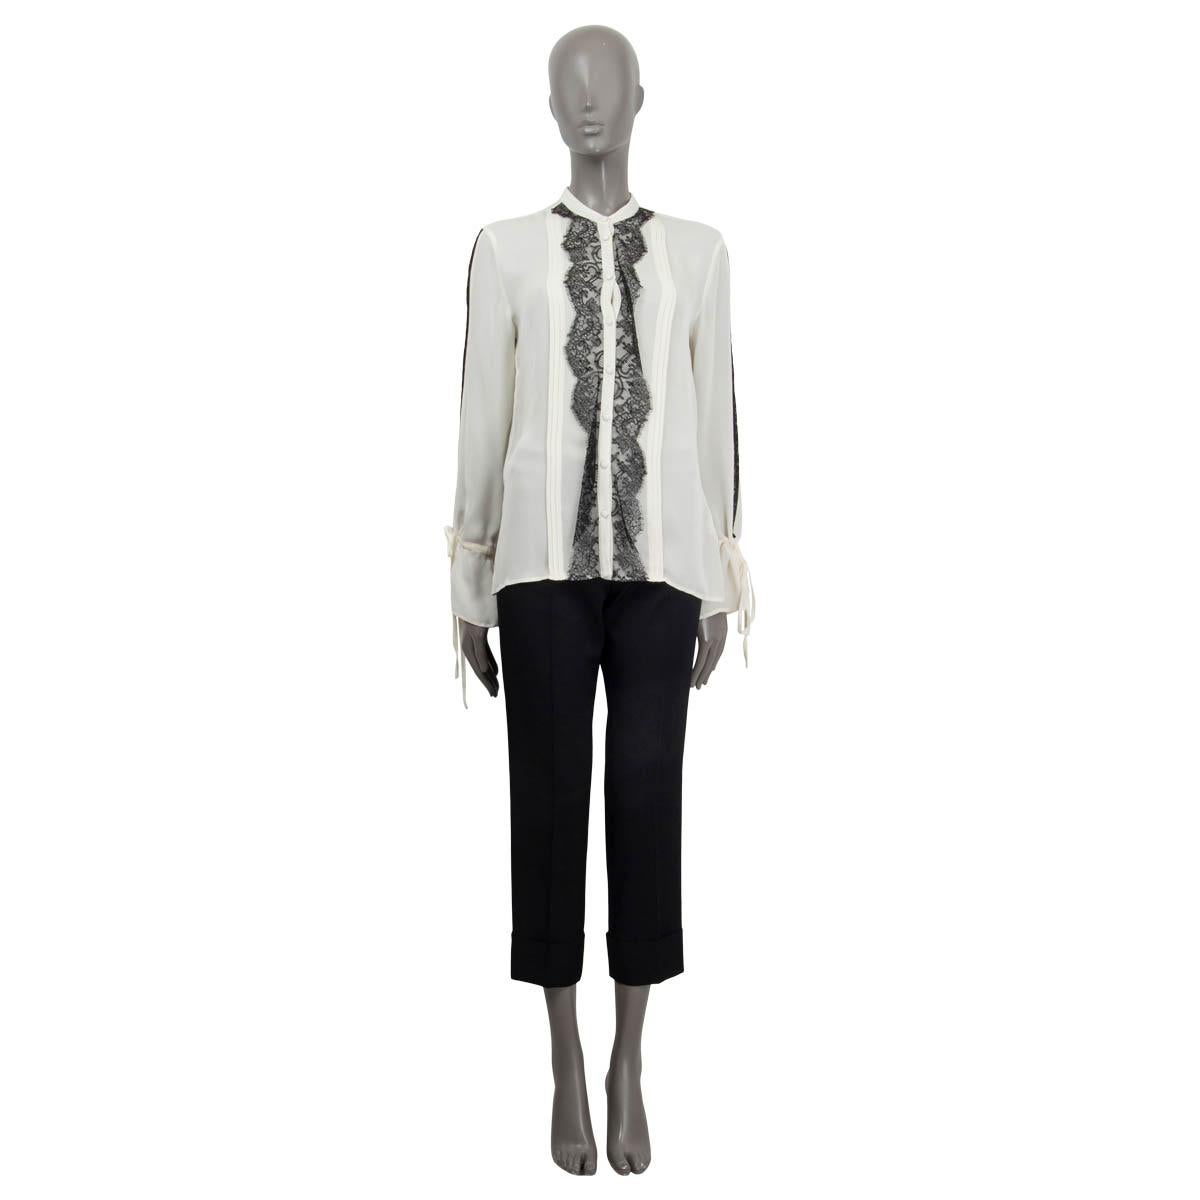 100% authentic Etro lace embellished pleated long sleeve blouse in semi-sheer white and black silk (100%). Features long sleeves and a drawstring closure at the cuffs. Opens with eight buttons on the front. Unlined. Has barely visible stains at the